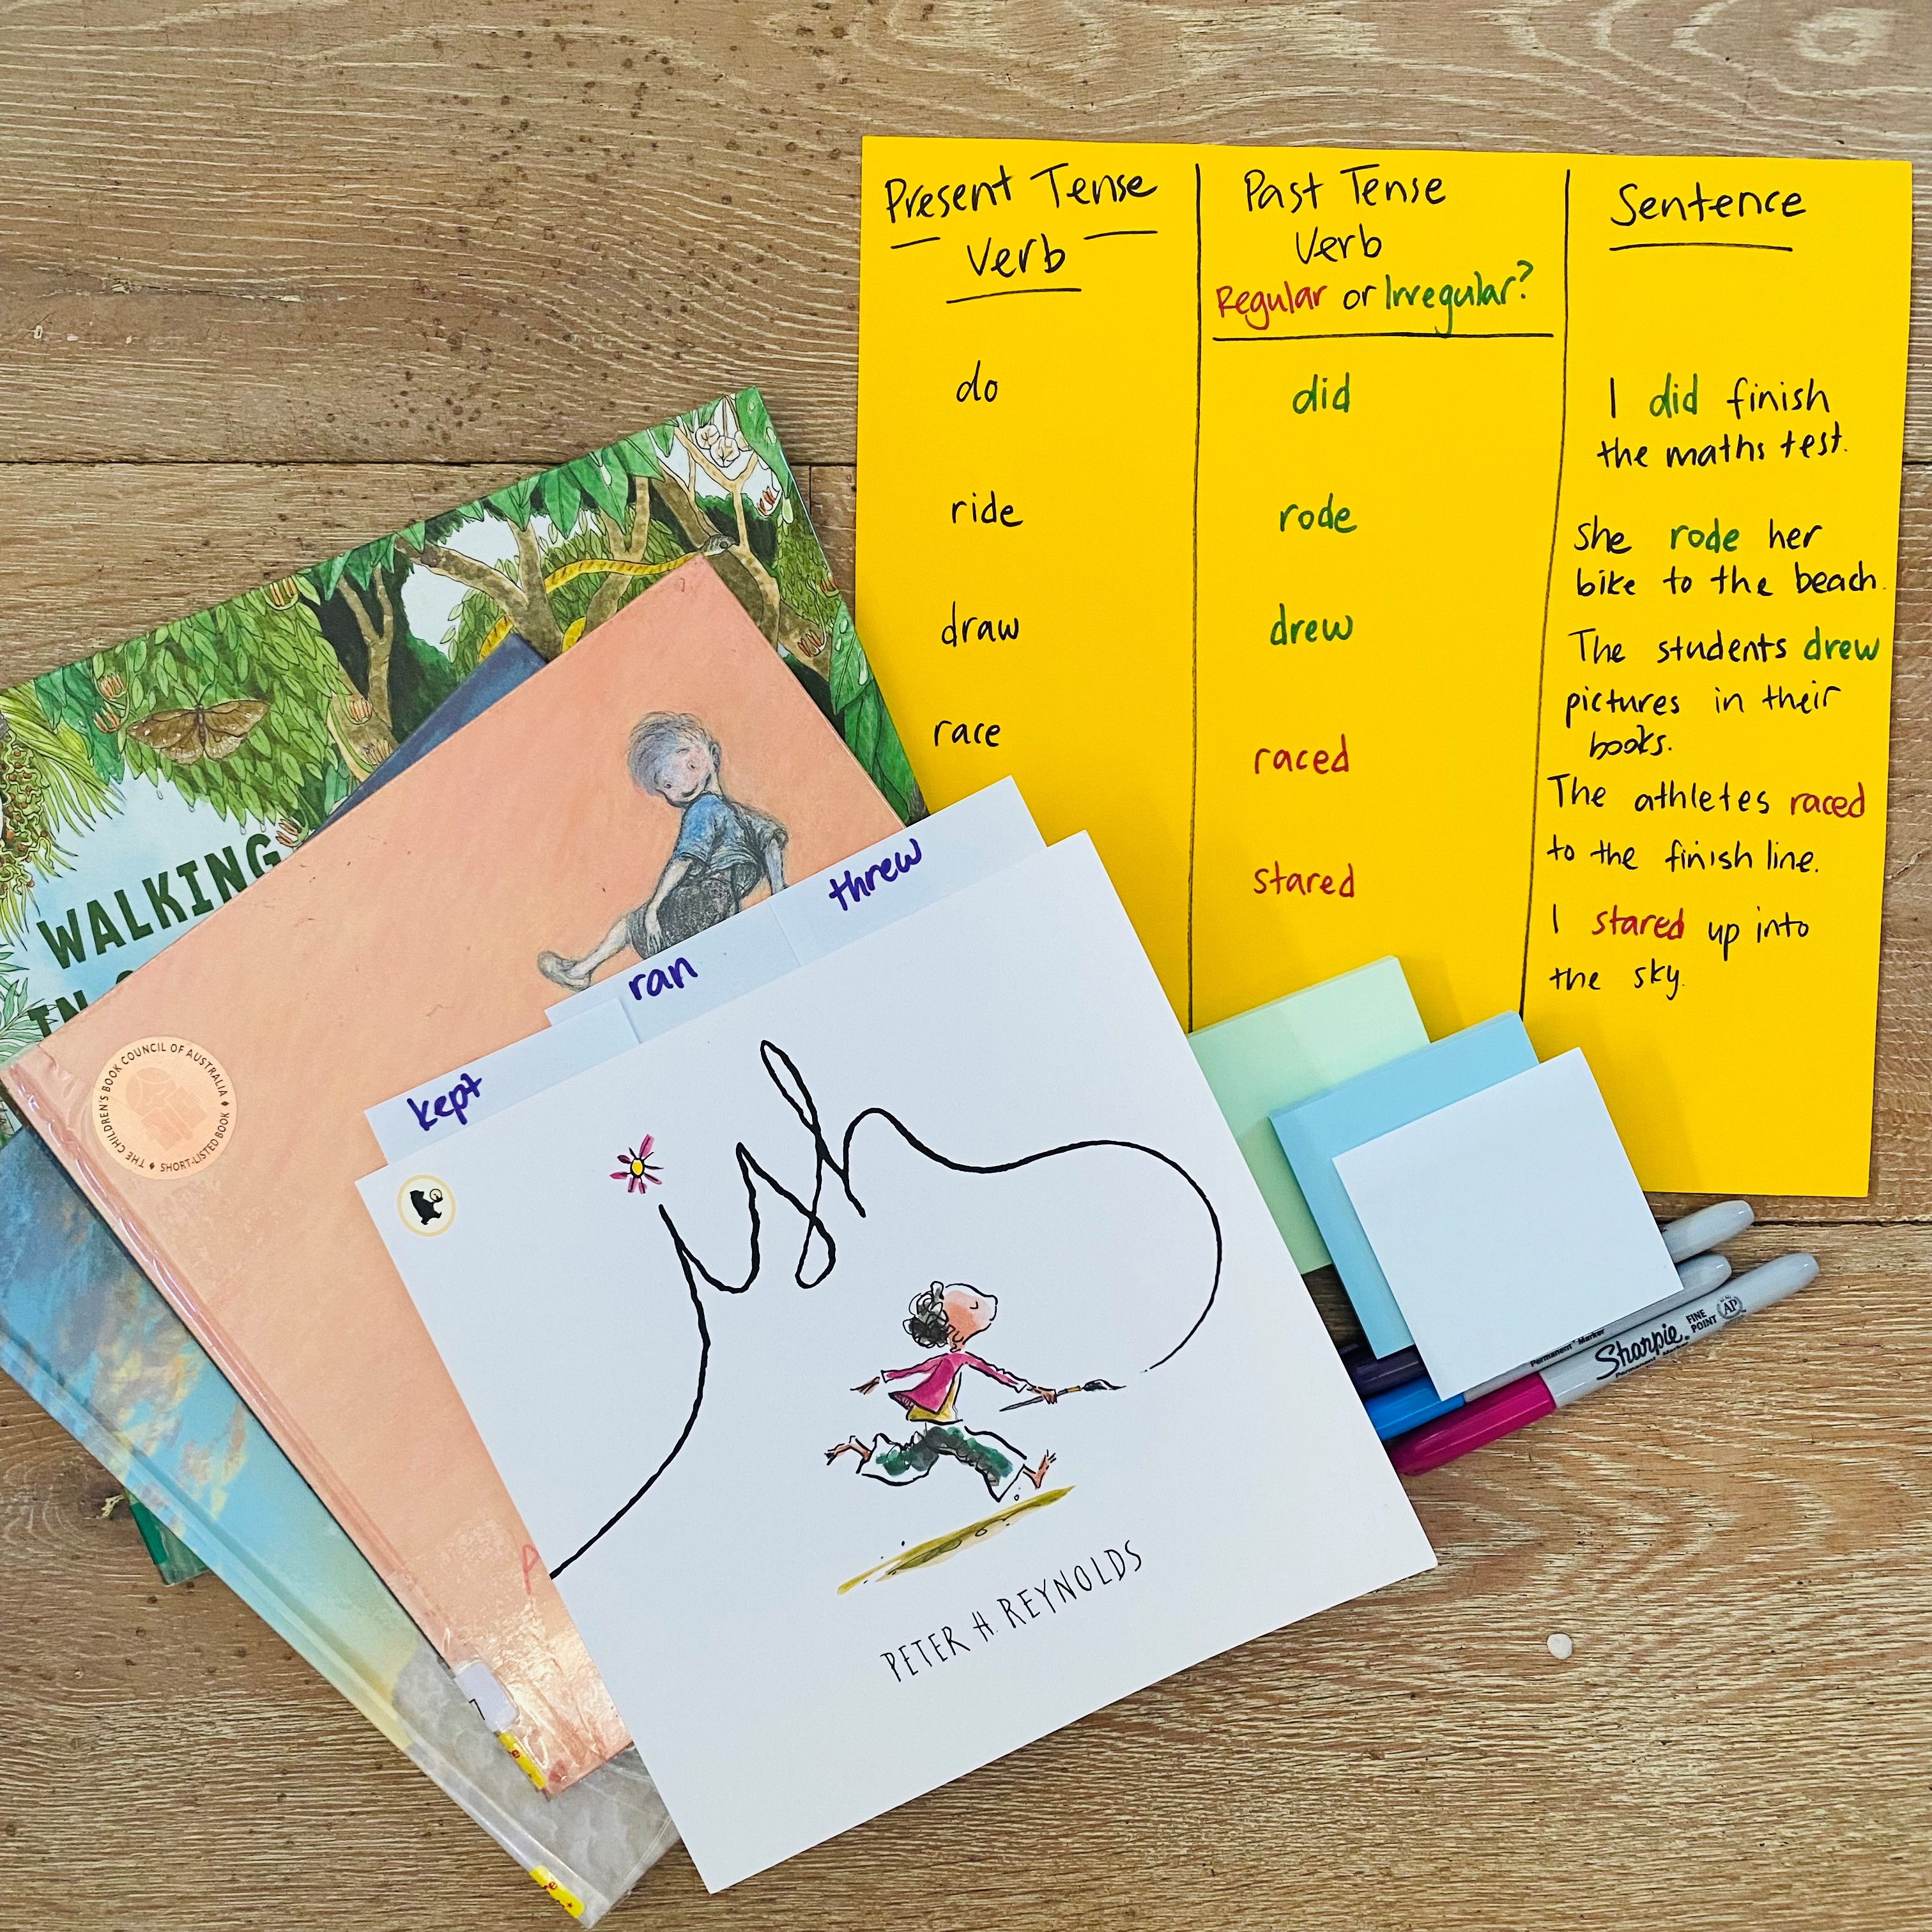 An engaging literacy lesson for grade 3-6 to develop students’ ability to identify past tense irregular verbs and understand the difference between regular and irregular verbs. The wonderful mentor text “Ish” by Peter Reynolds is used as inspiration to assist students in forming and using irregular verbs, which can be spotted on just about every page!